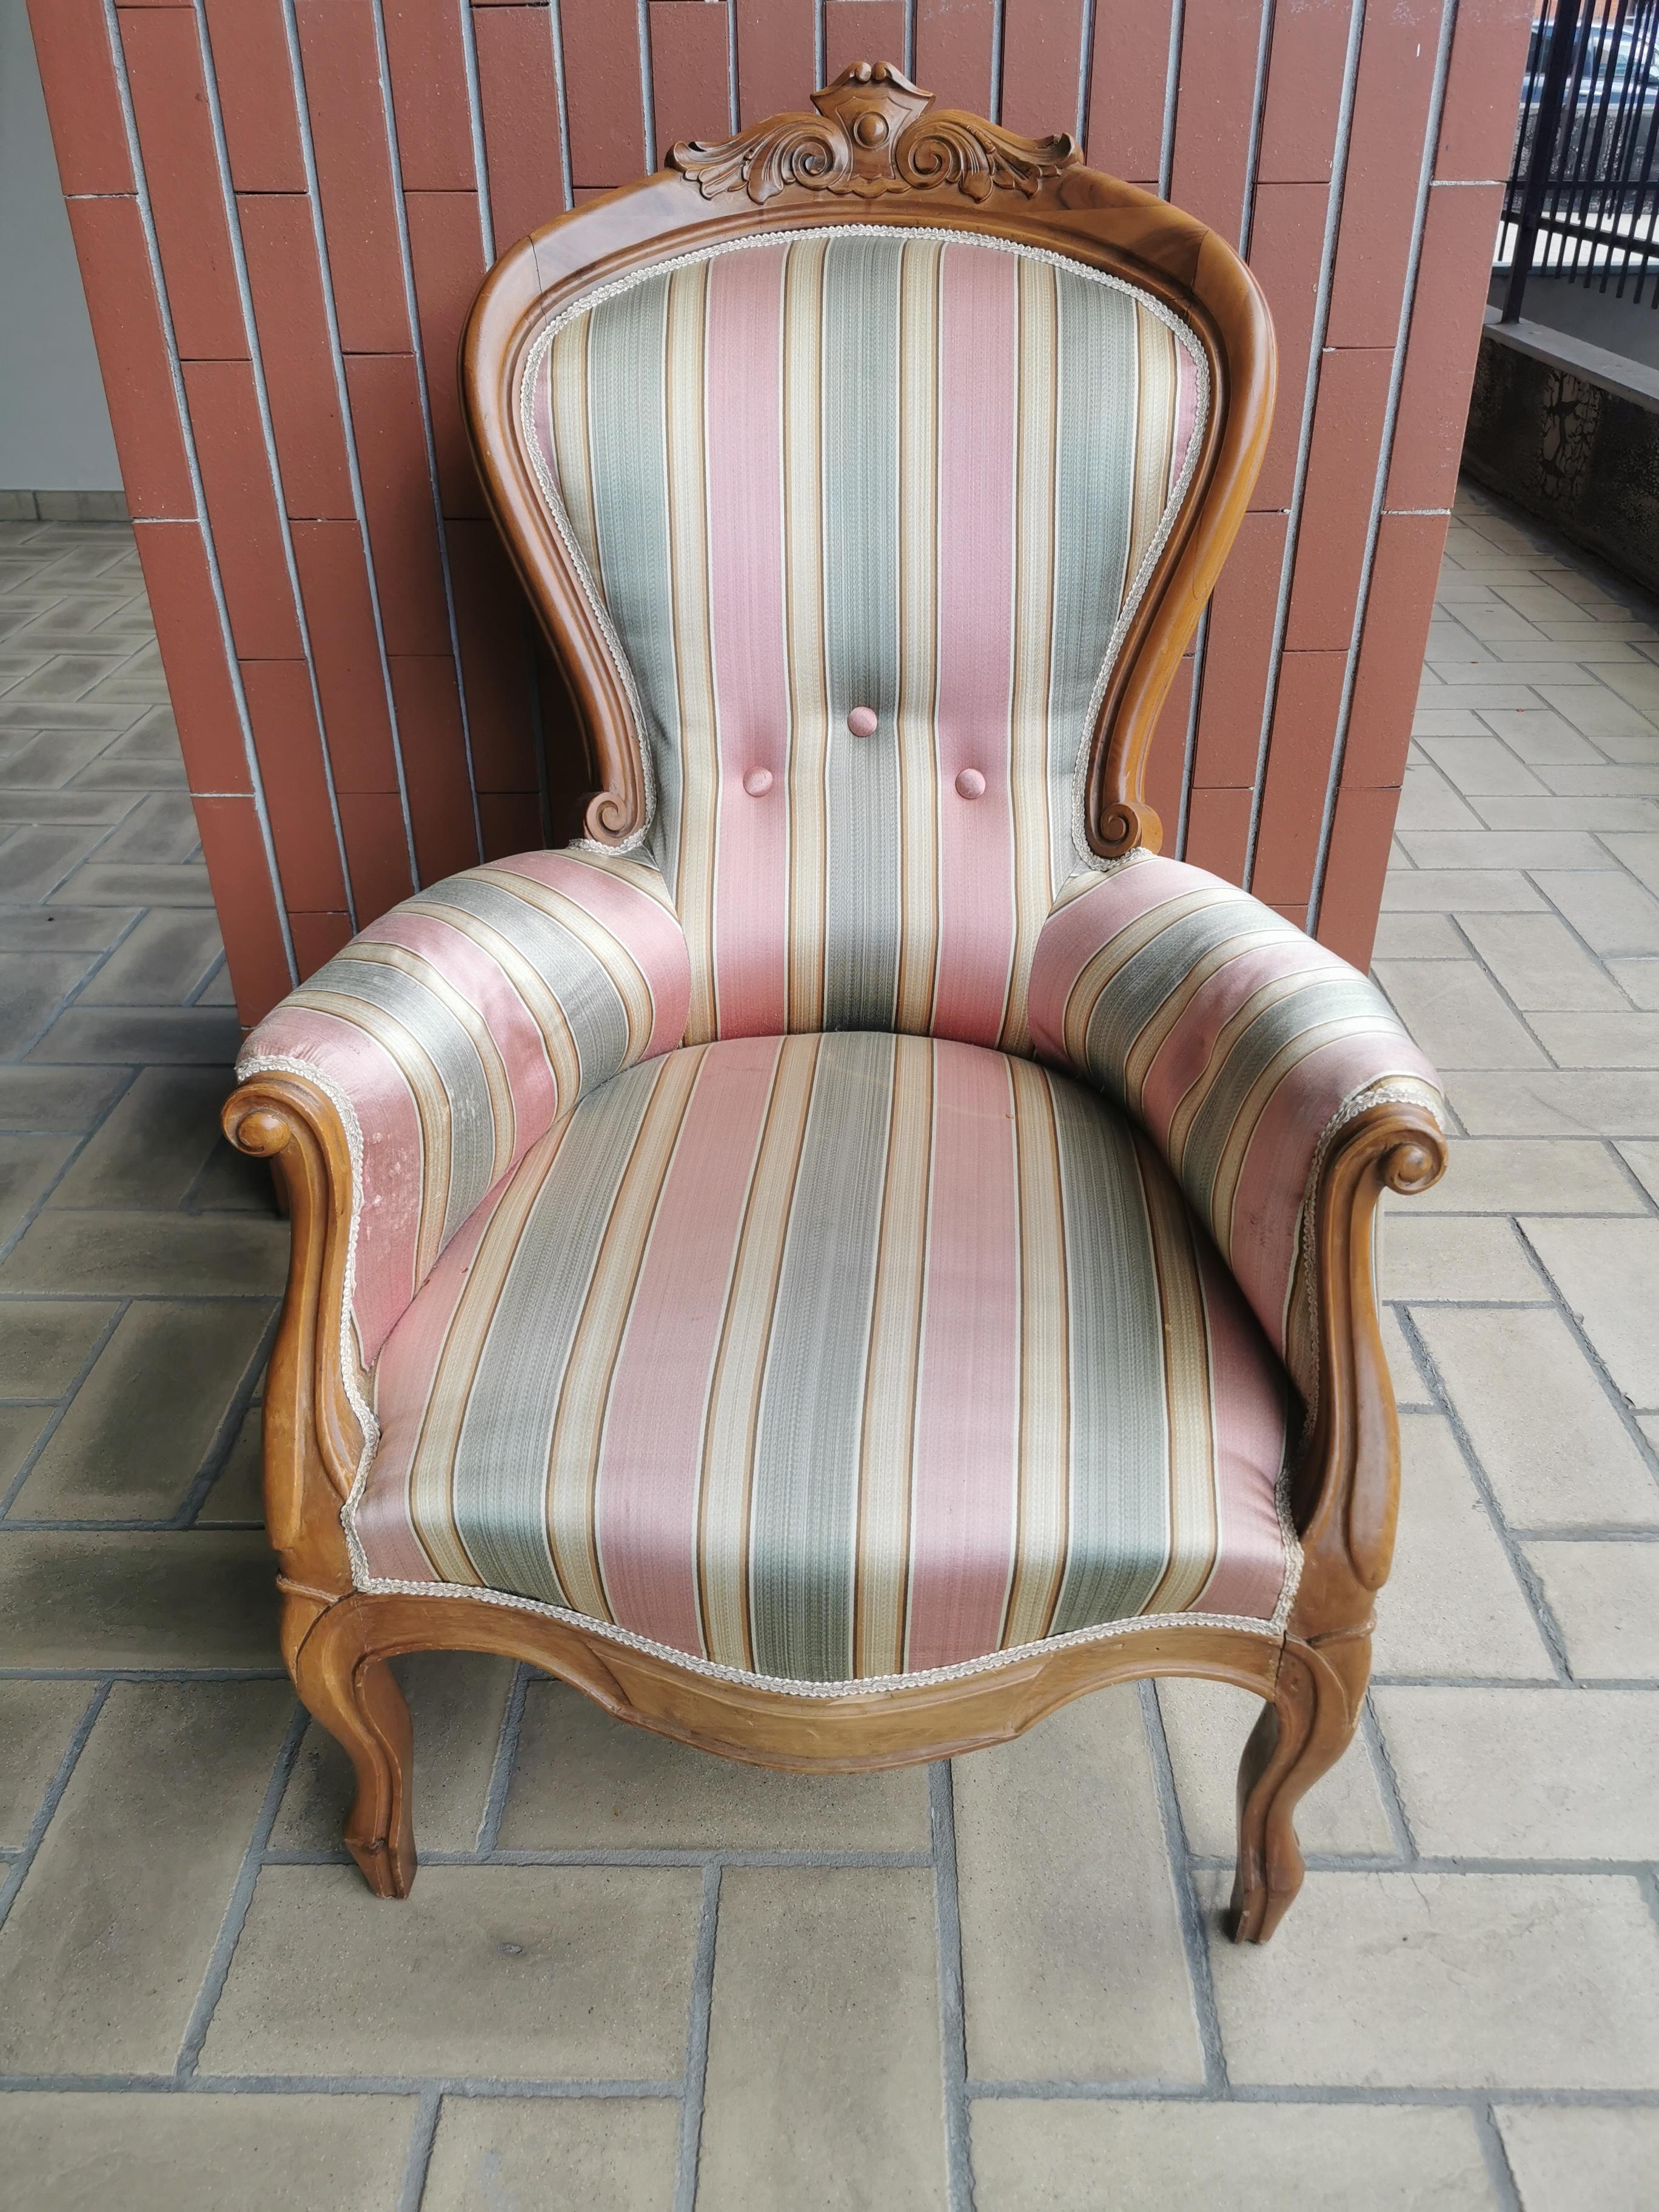 Armchair, lounge chair, walnut, , 19th century Louis Philippe armchair
Very elegant Louis Philippe period armchair from 19th century, circa 1840-1850 France
Covered with silk and structure is walnut
Silk part has some signs of agings on color but